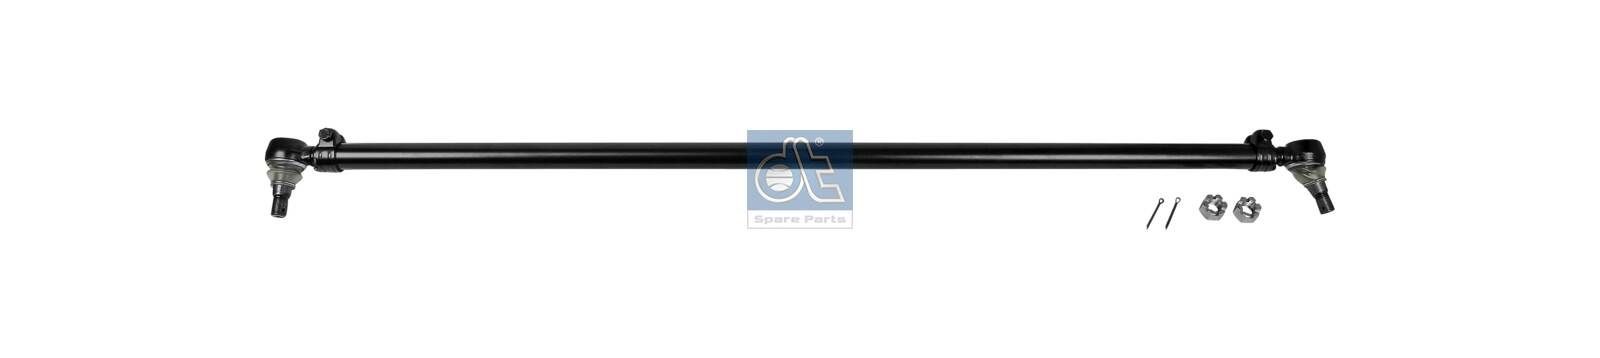 DT Spare Parts 2.53116 Rod Assembly 21262030